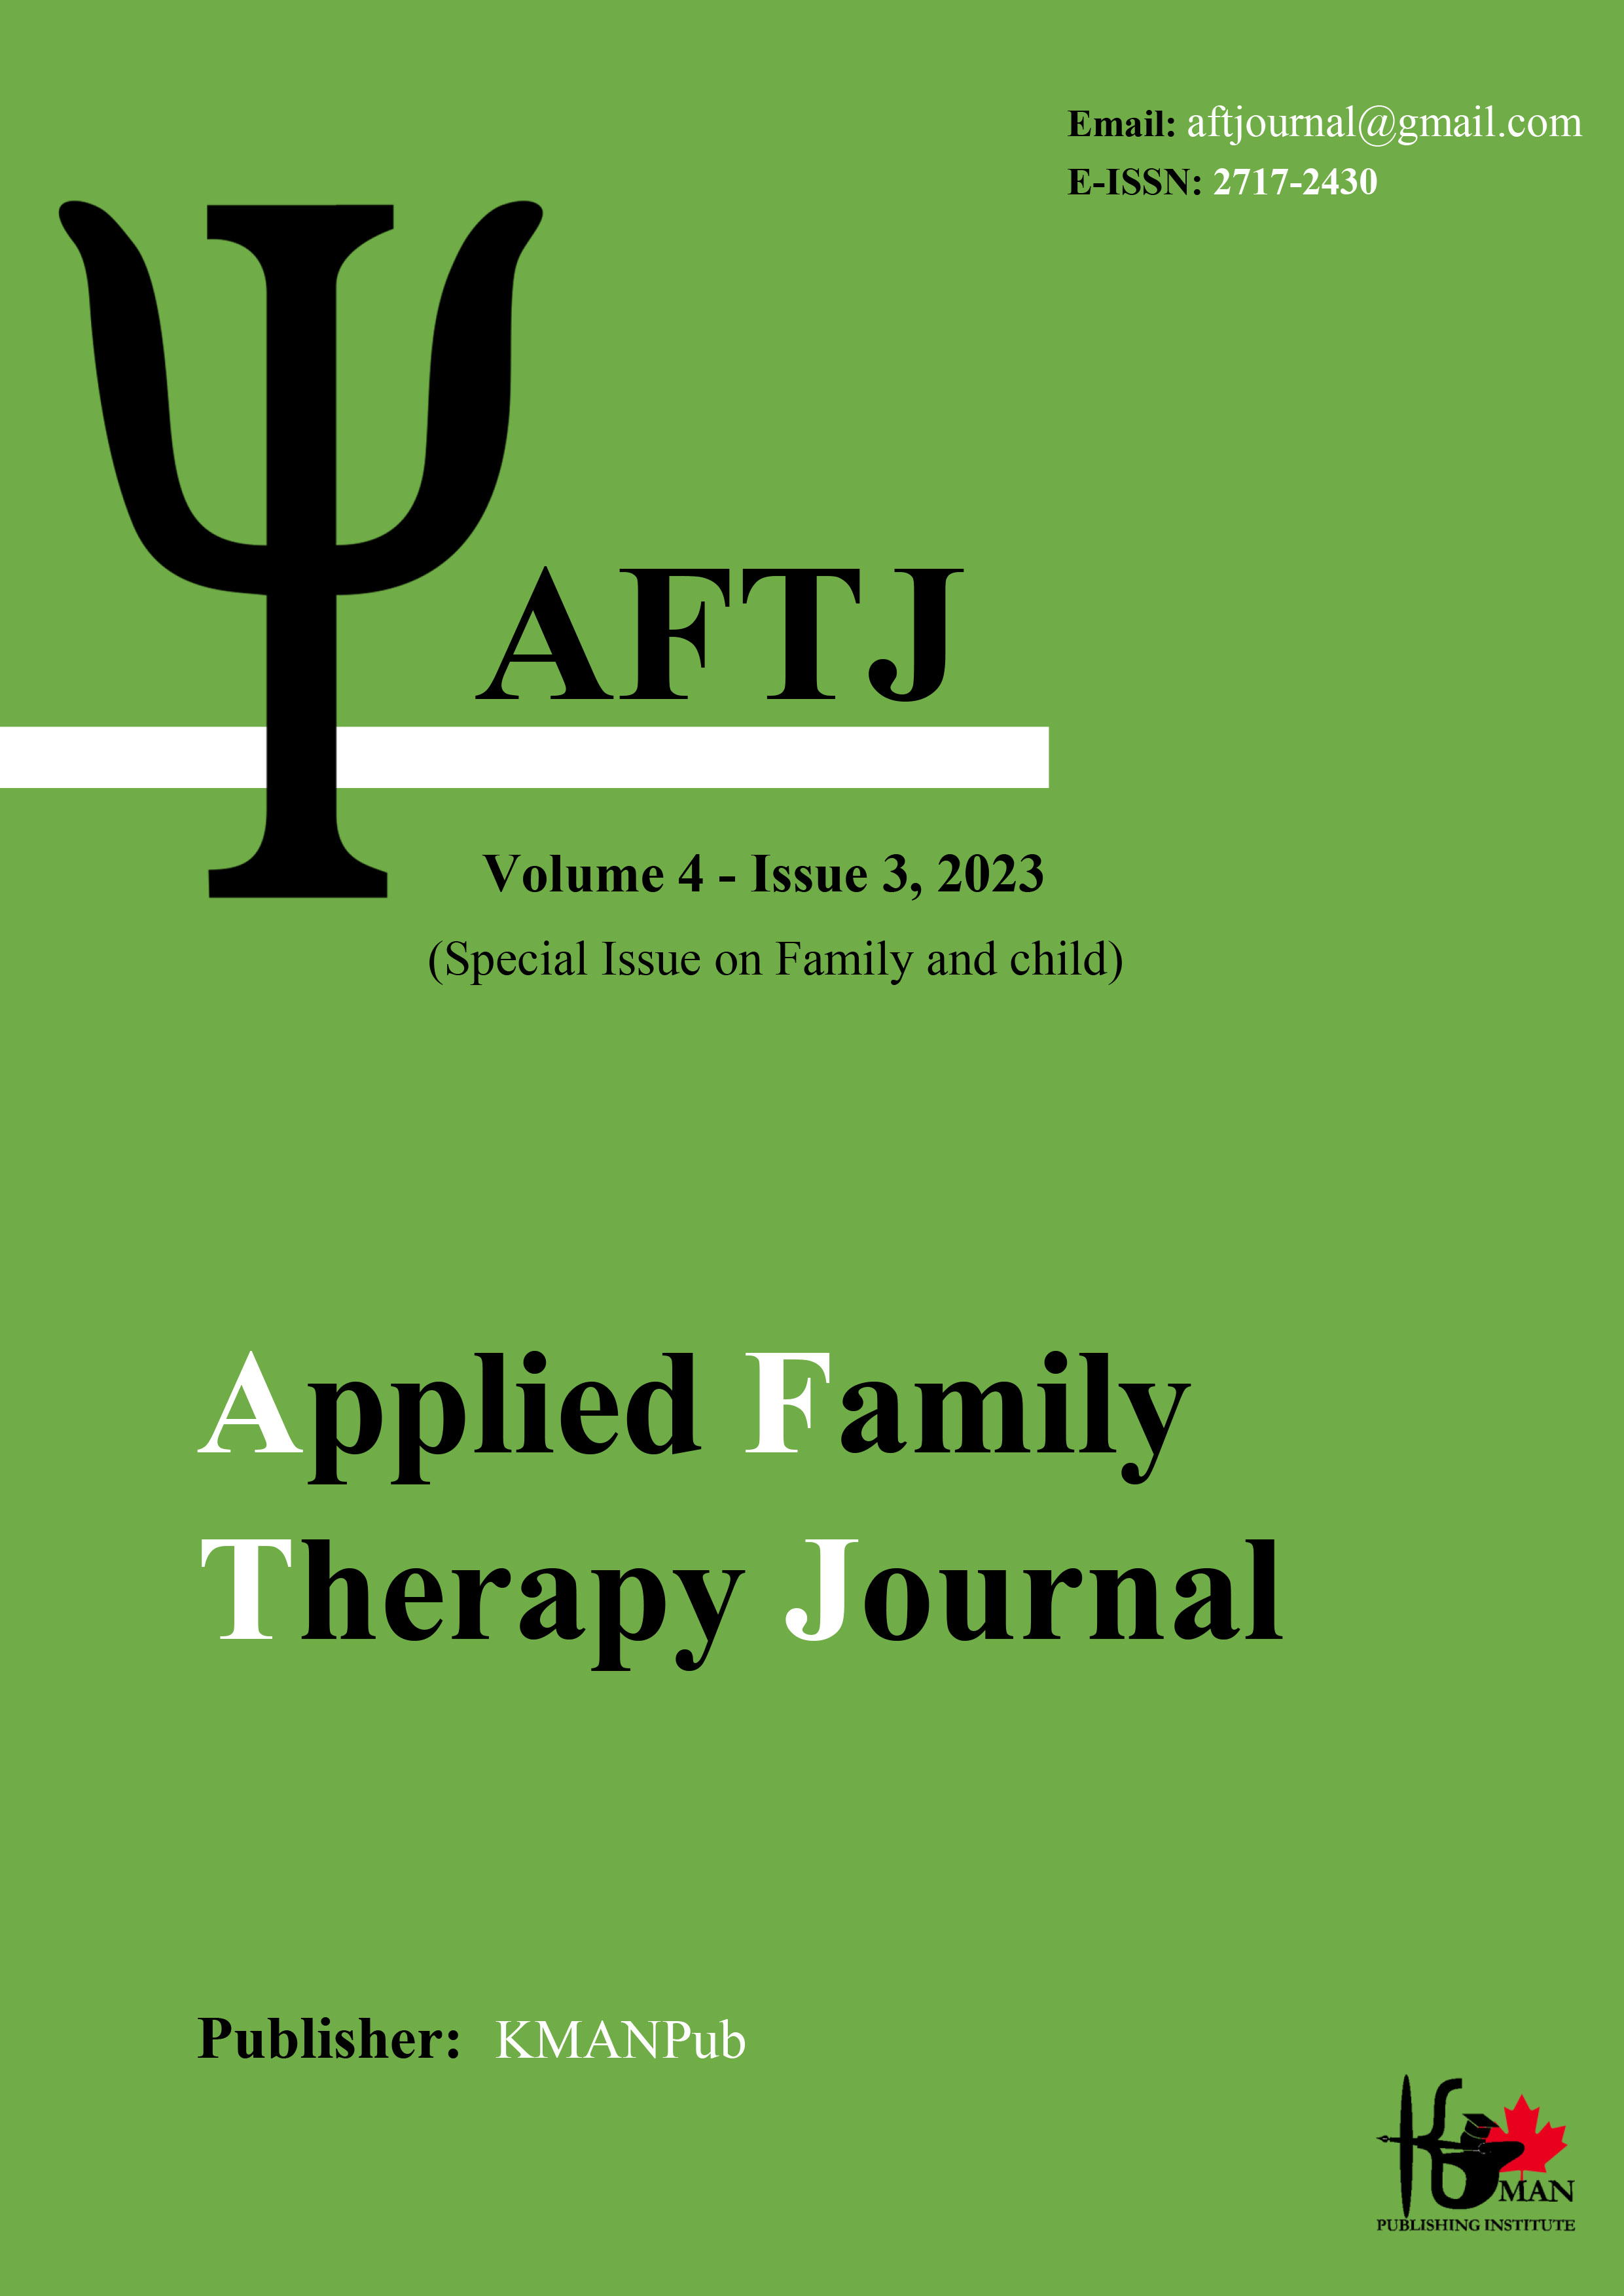 					View Vol. 4 No. 3 (2023): Serial Number 17 (Special Issue on Family and child)
				